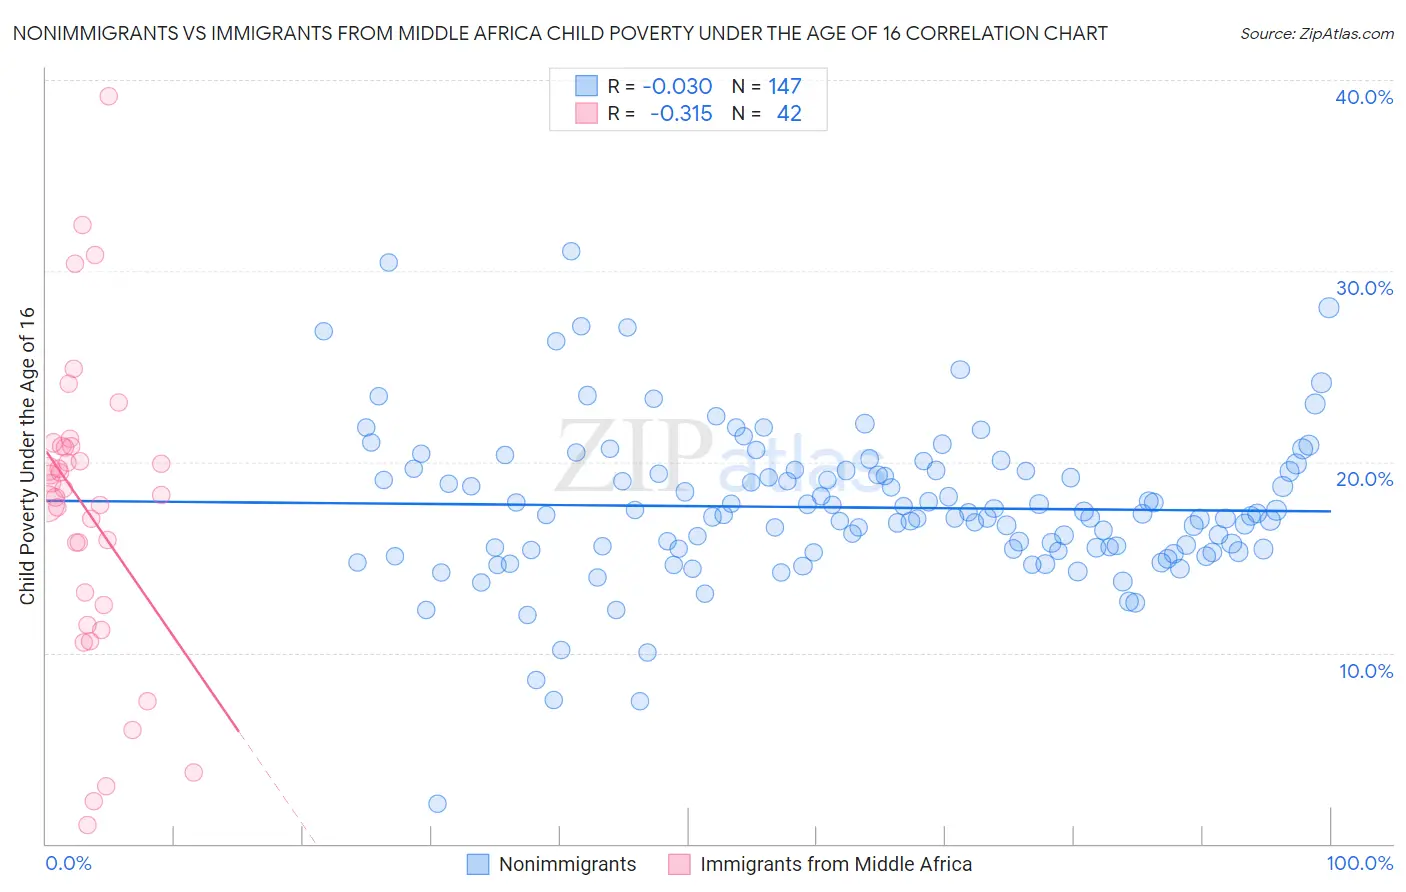 Nonimmigrants vs Immigrants from Middle Africa Child Poverty Under the Age of 16